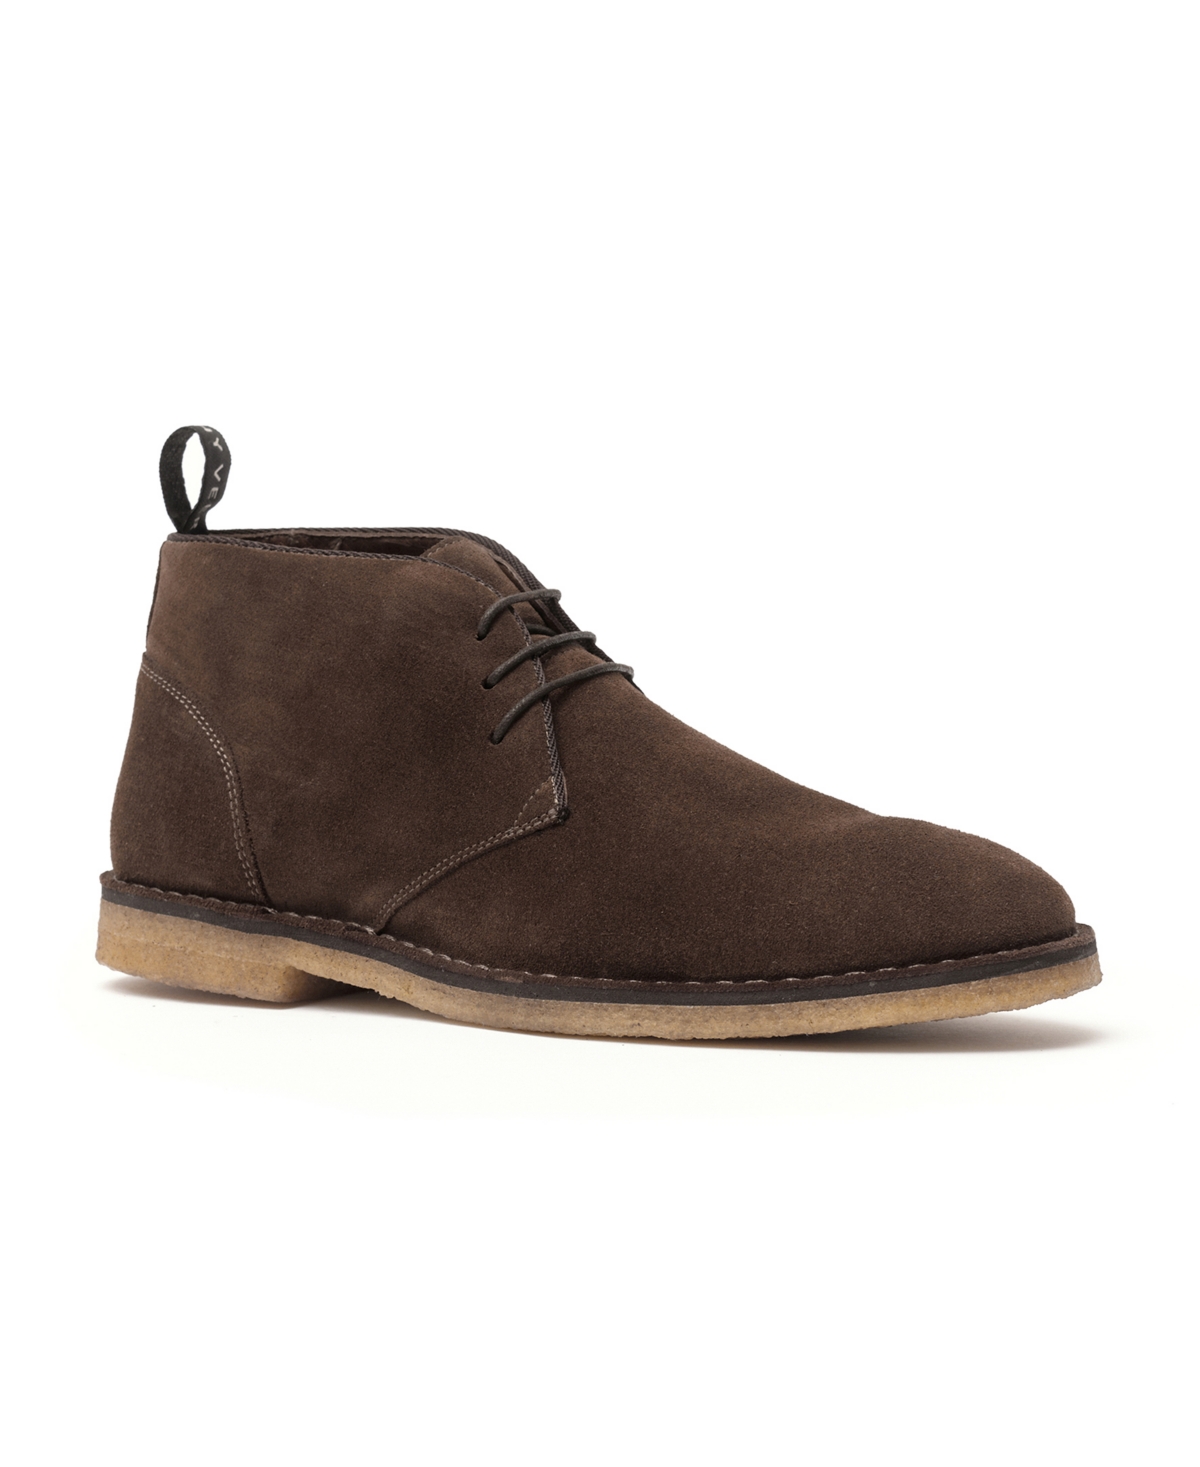 Men's George Suede Lace-Up Chukka Boots - Olive